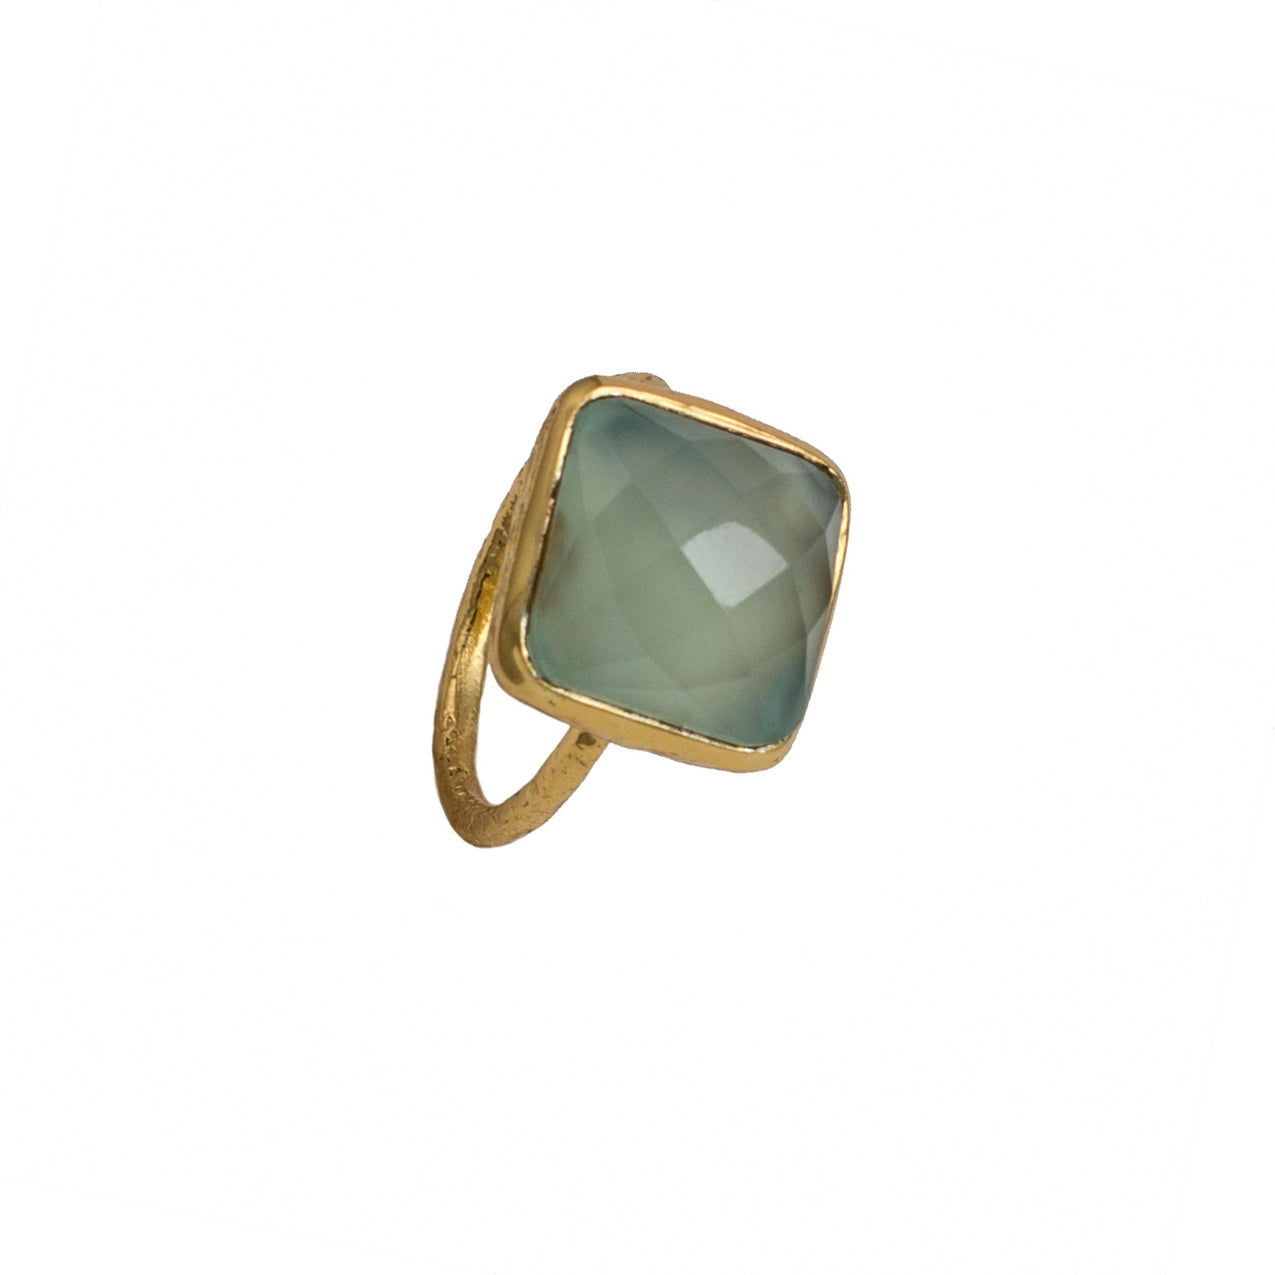 Aqua Chalcedony Gold Plated Silver Ring with Square Semiprecious Stone 